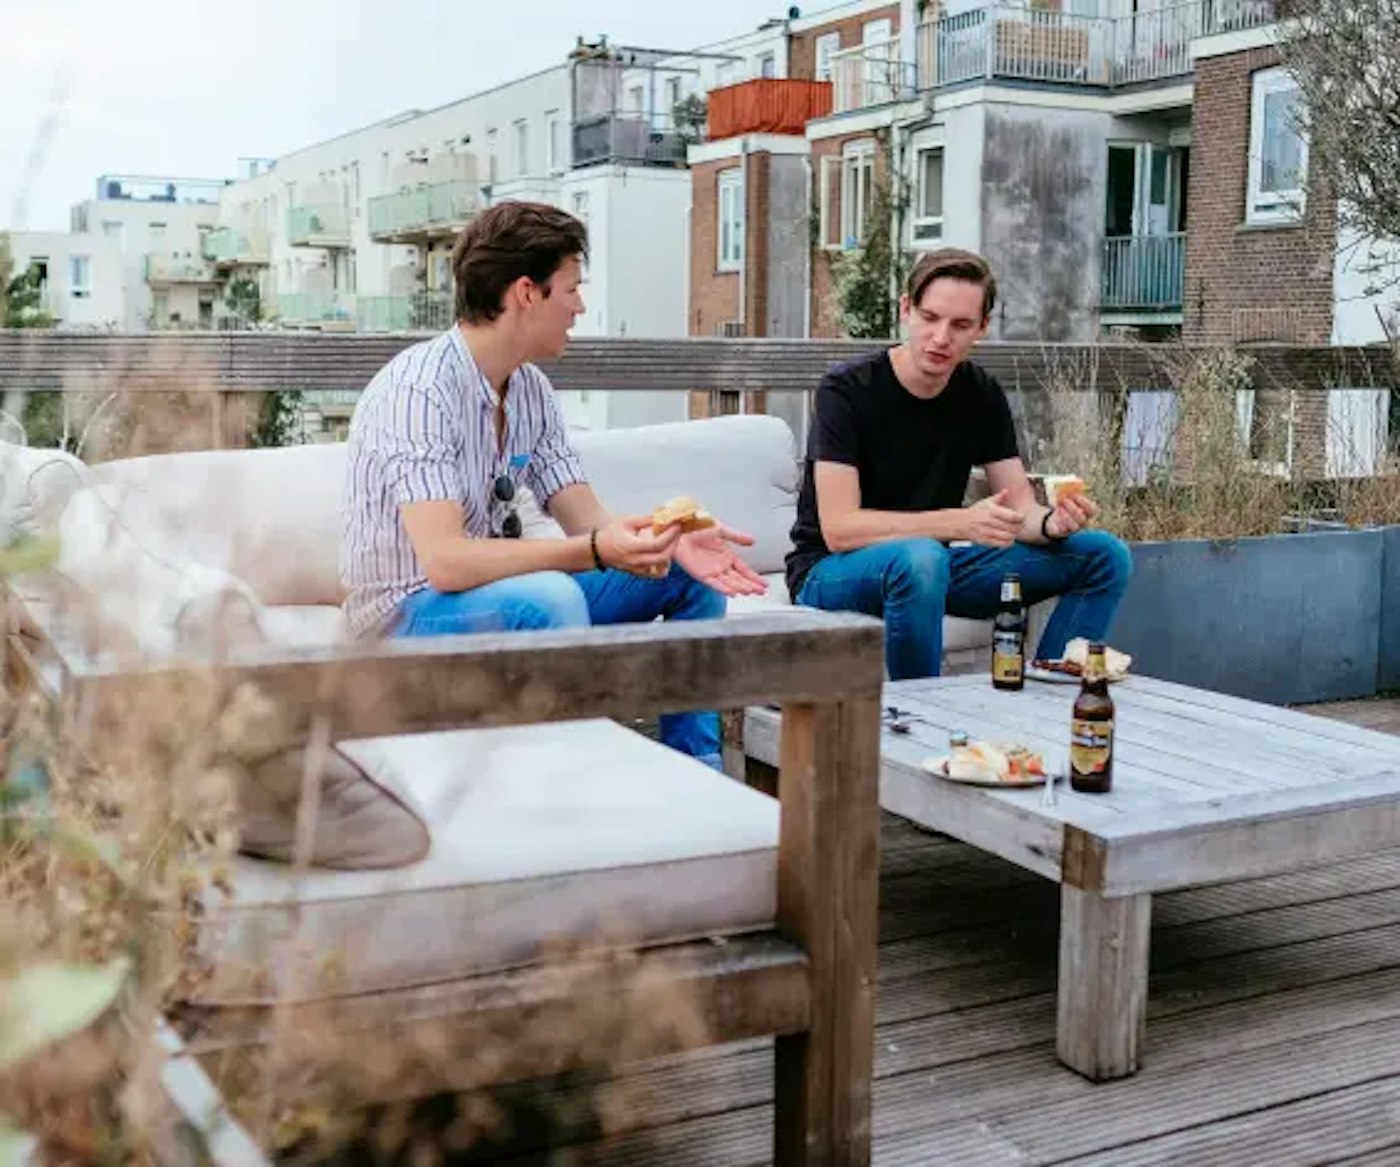 Hessel and Didier chilling on the rooftop.